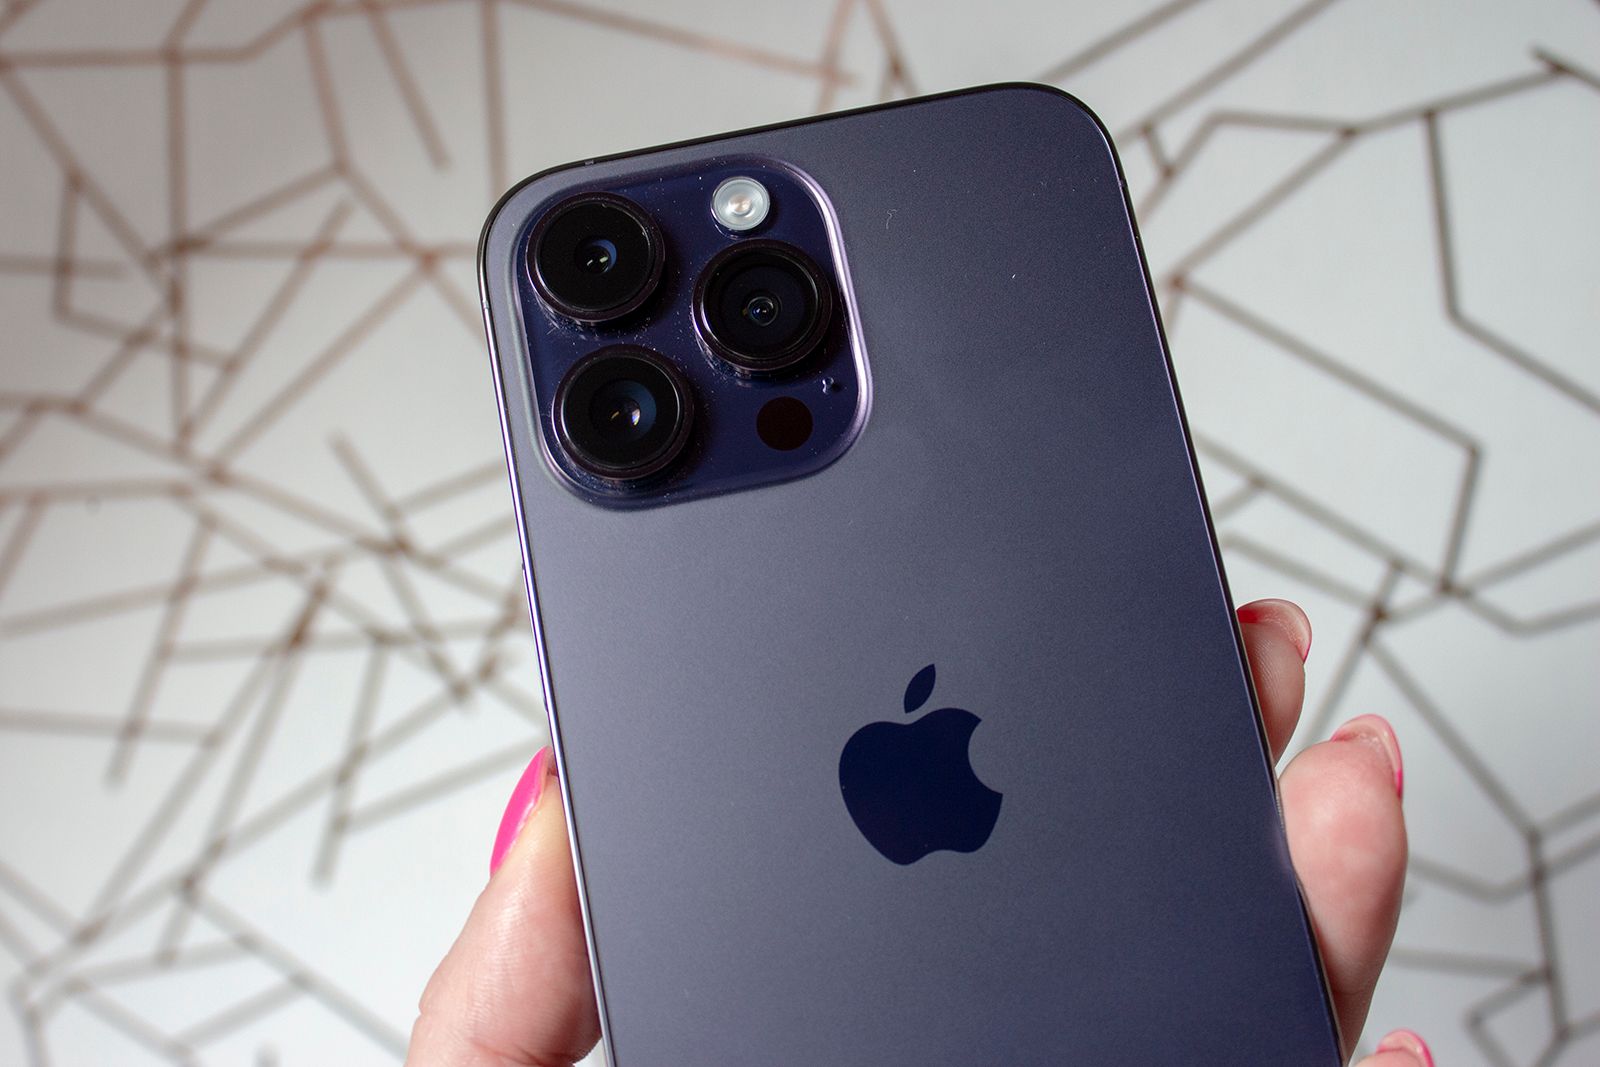 iPhone 14 Pro Max cameras shown on a deep purple handset